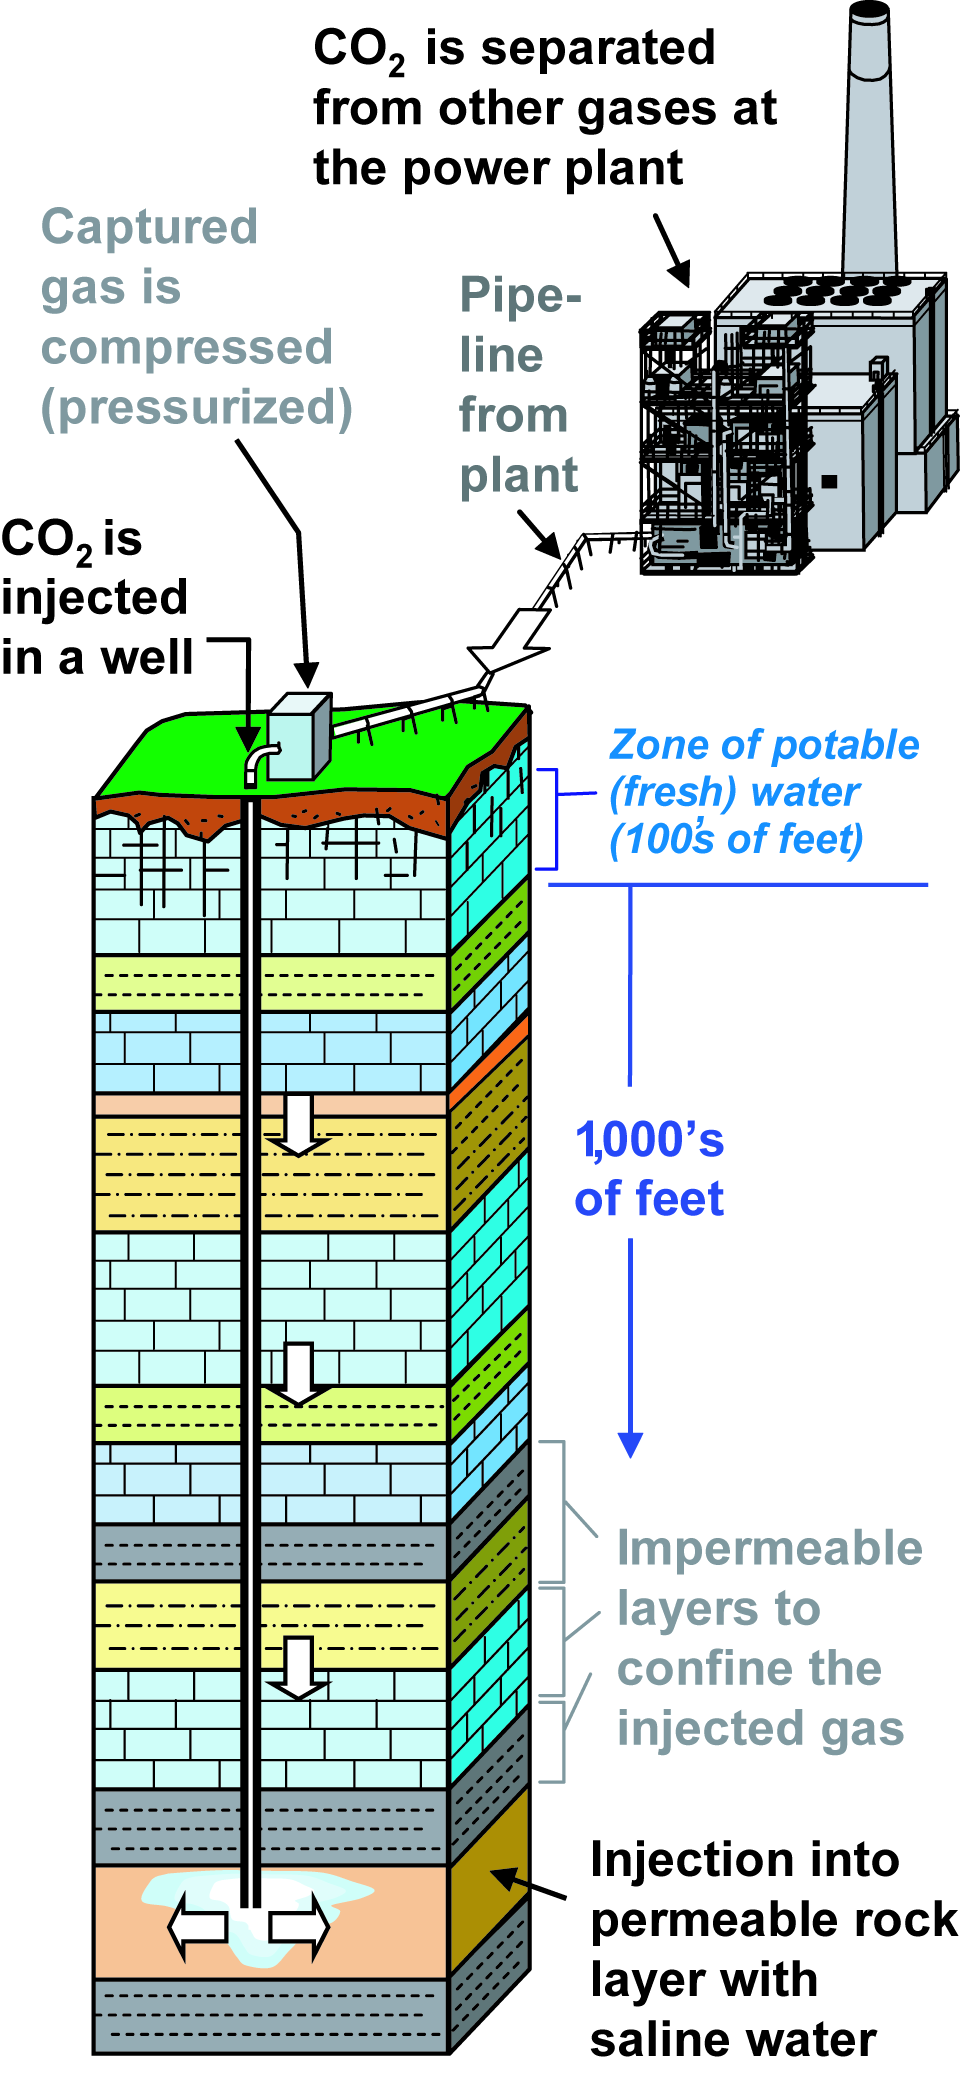 General geologic column showing capture at power plant and underground injection.